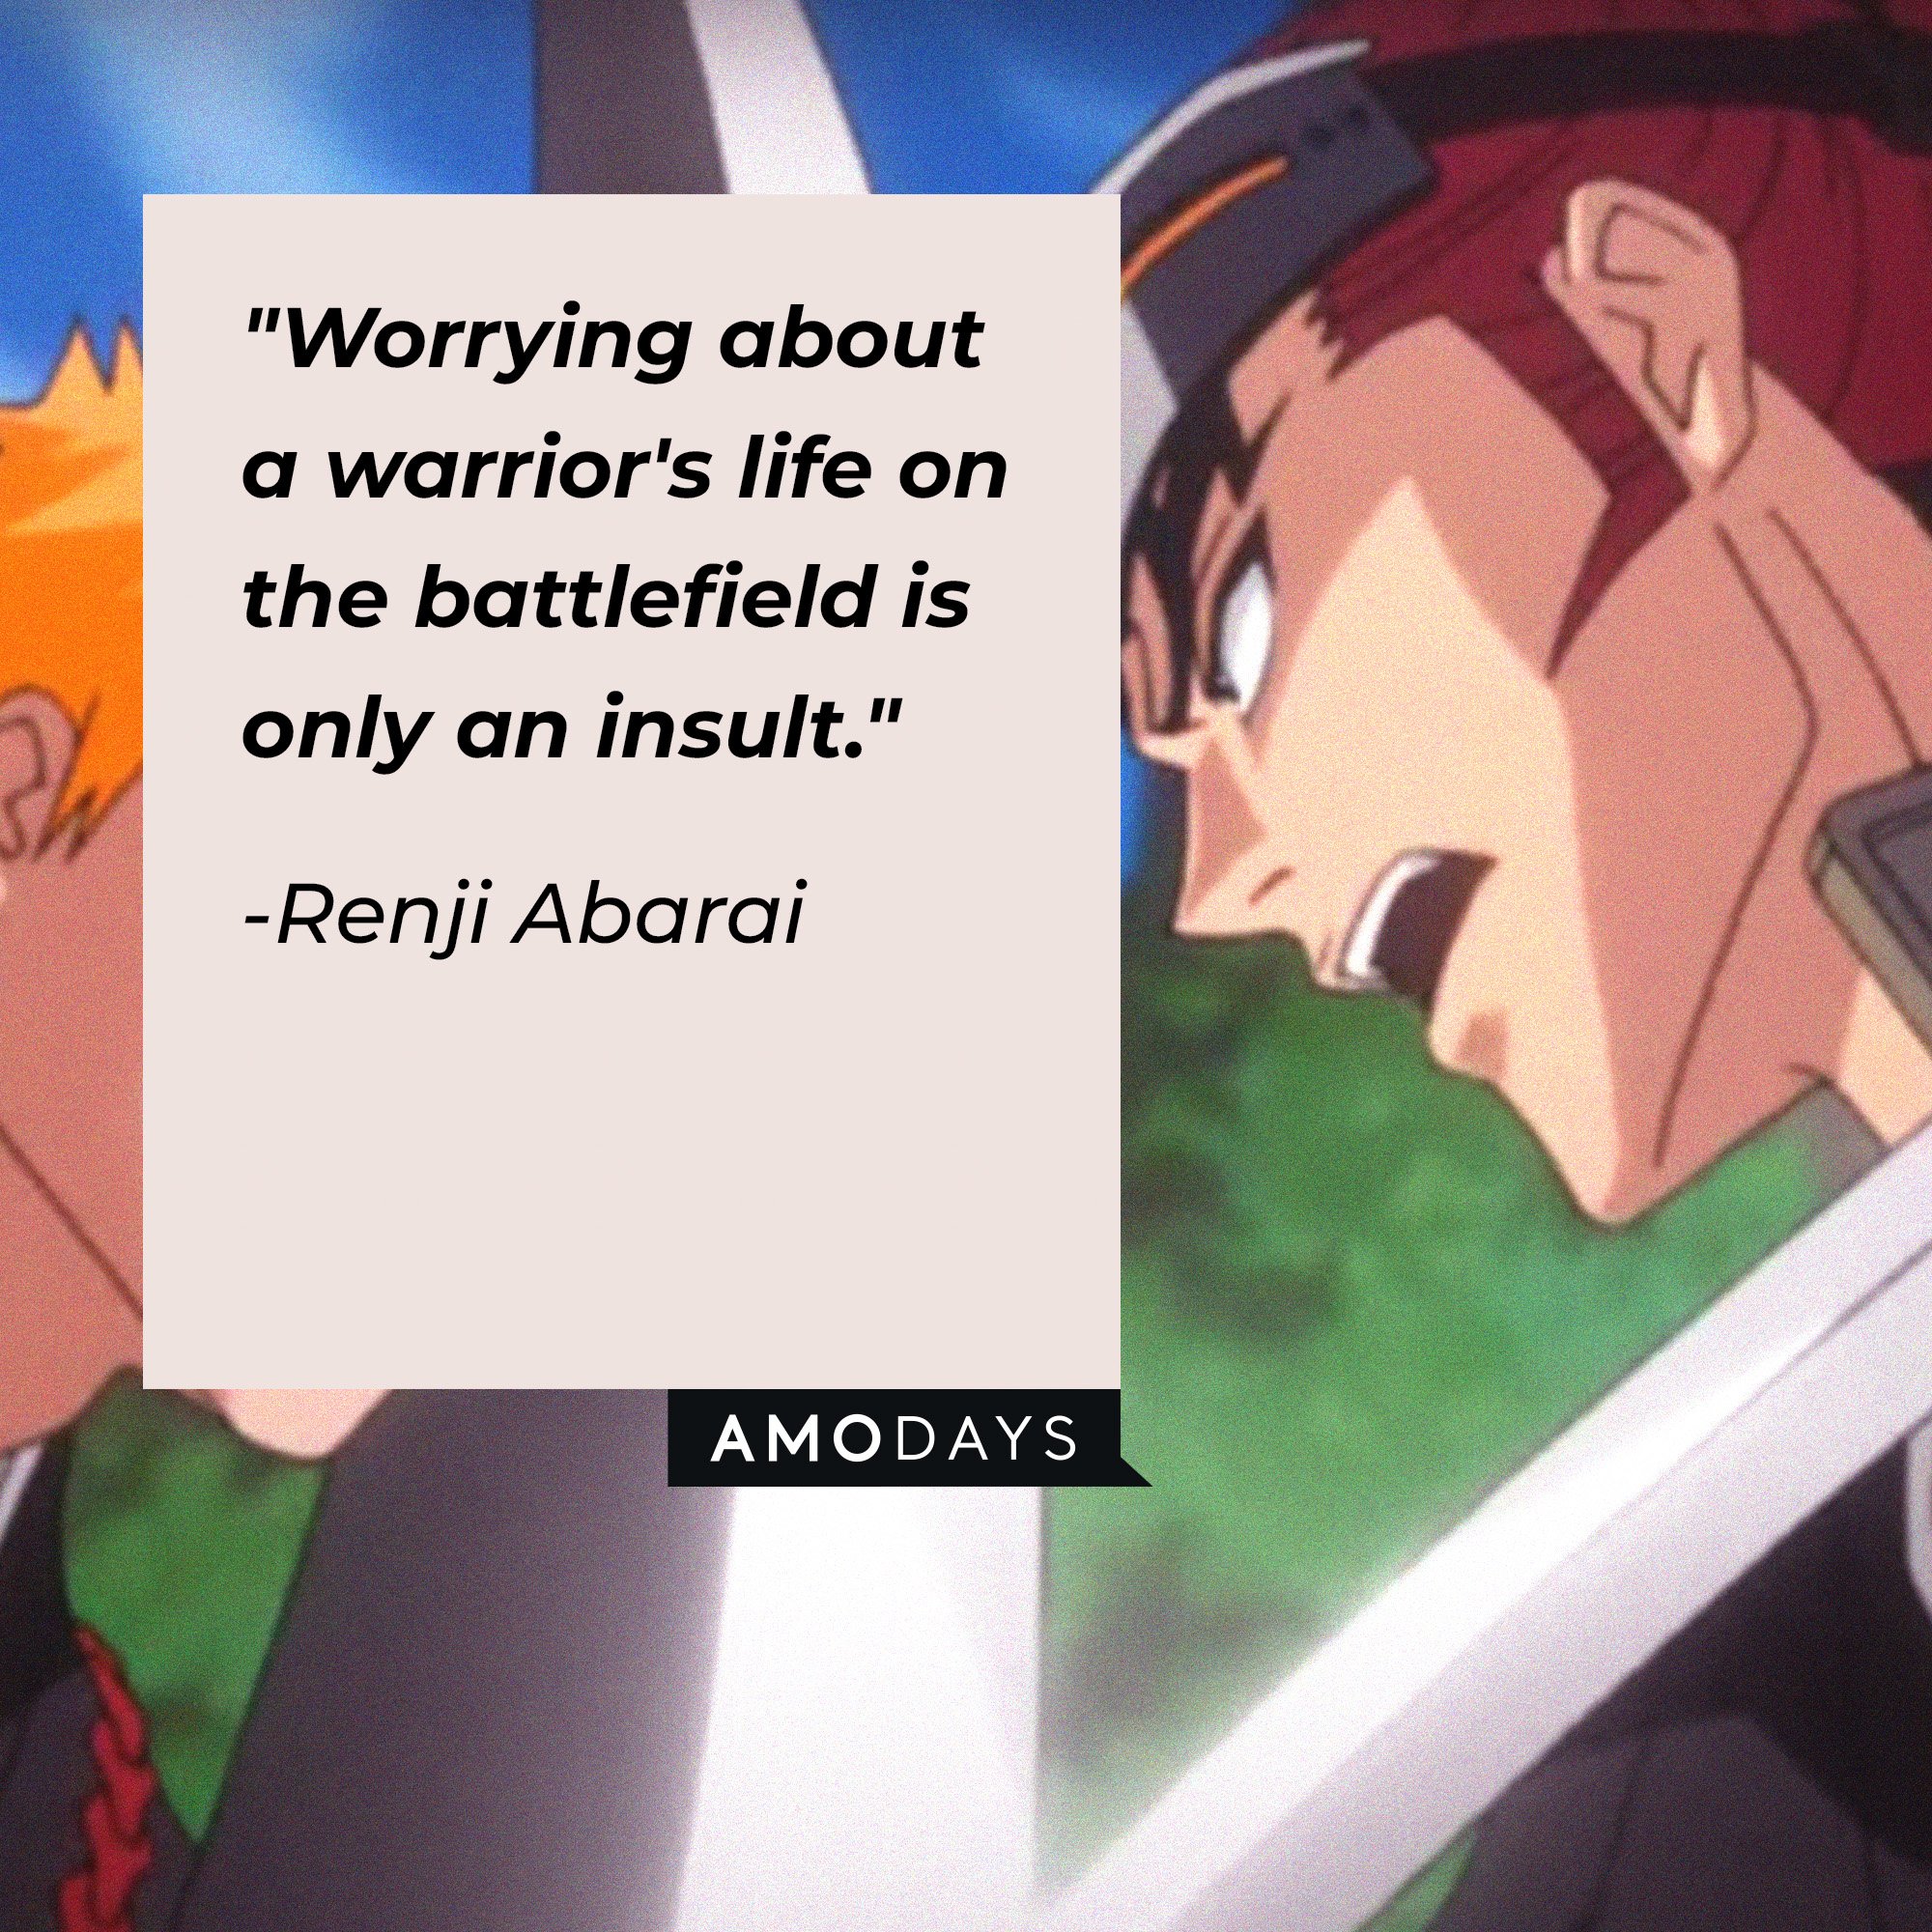 Renji Abarai’s quote: "Worrying about a warrior's life on the battlefield is only an insult." | Image: AmoDays